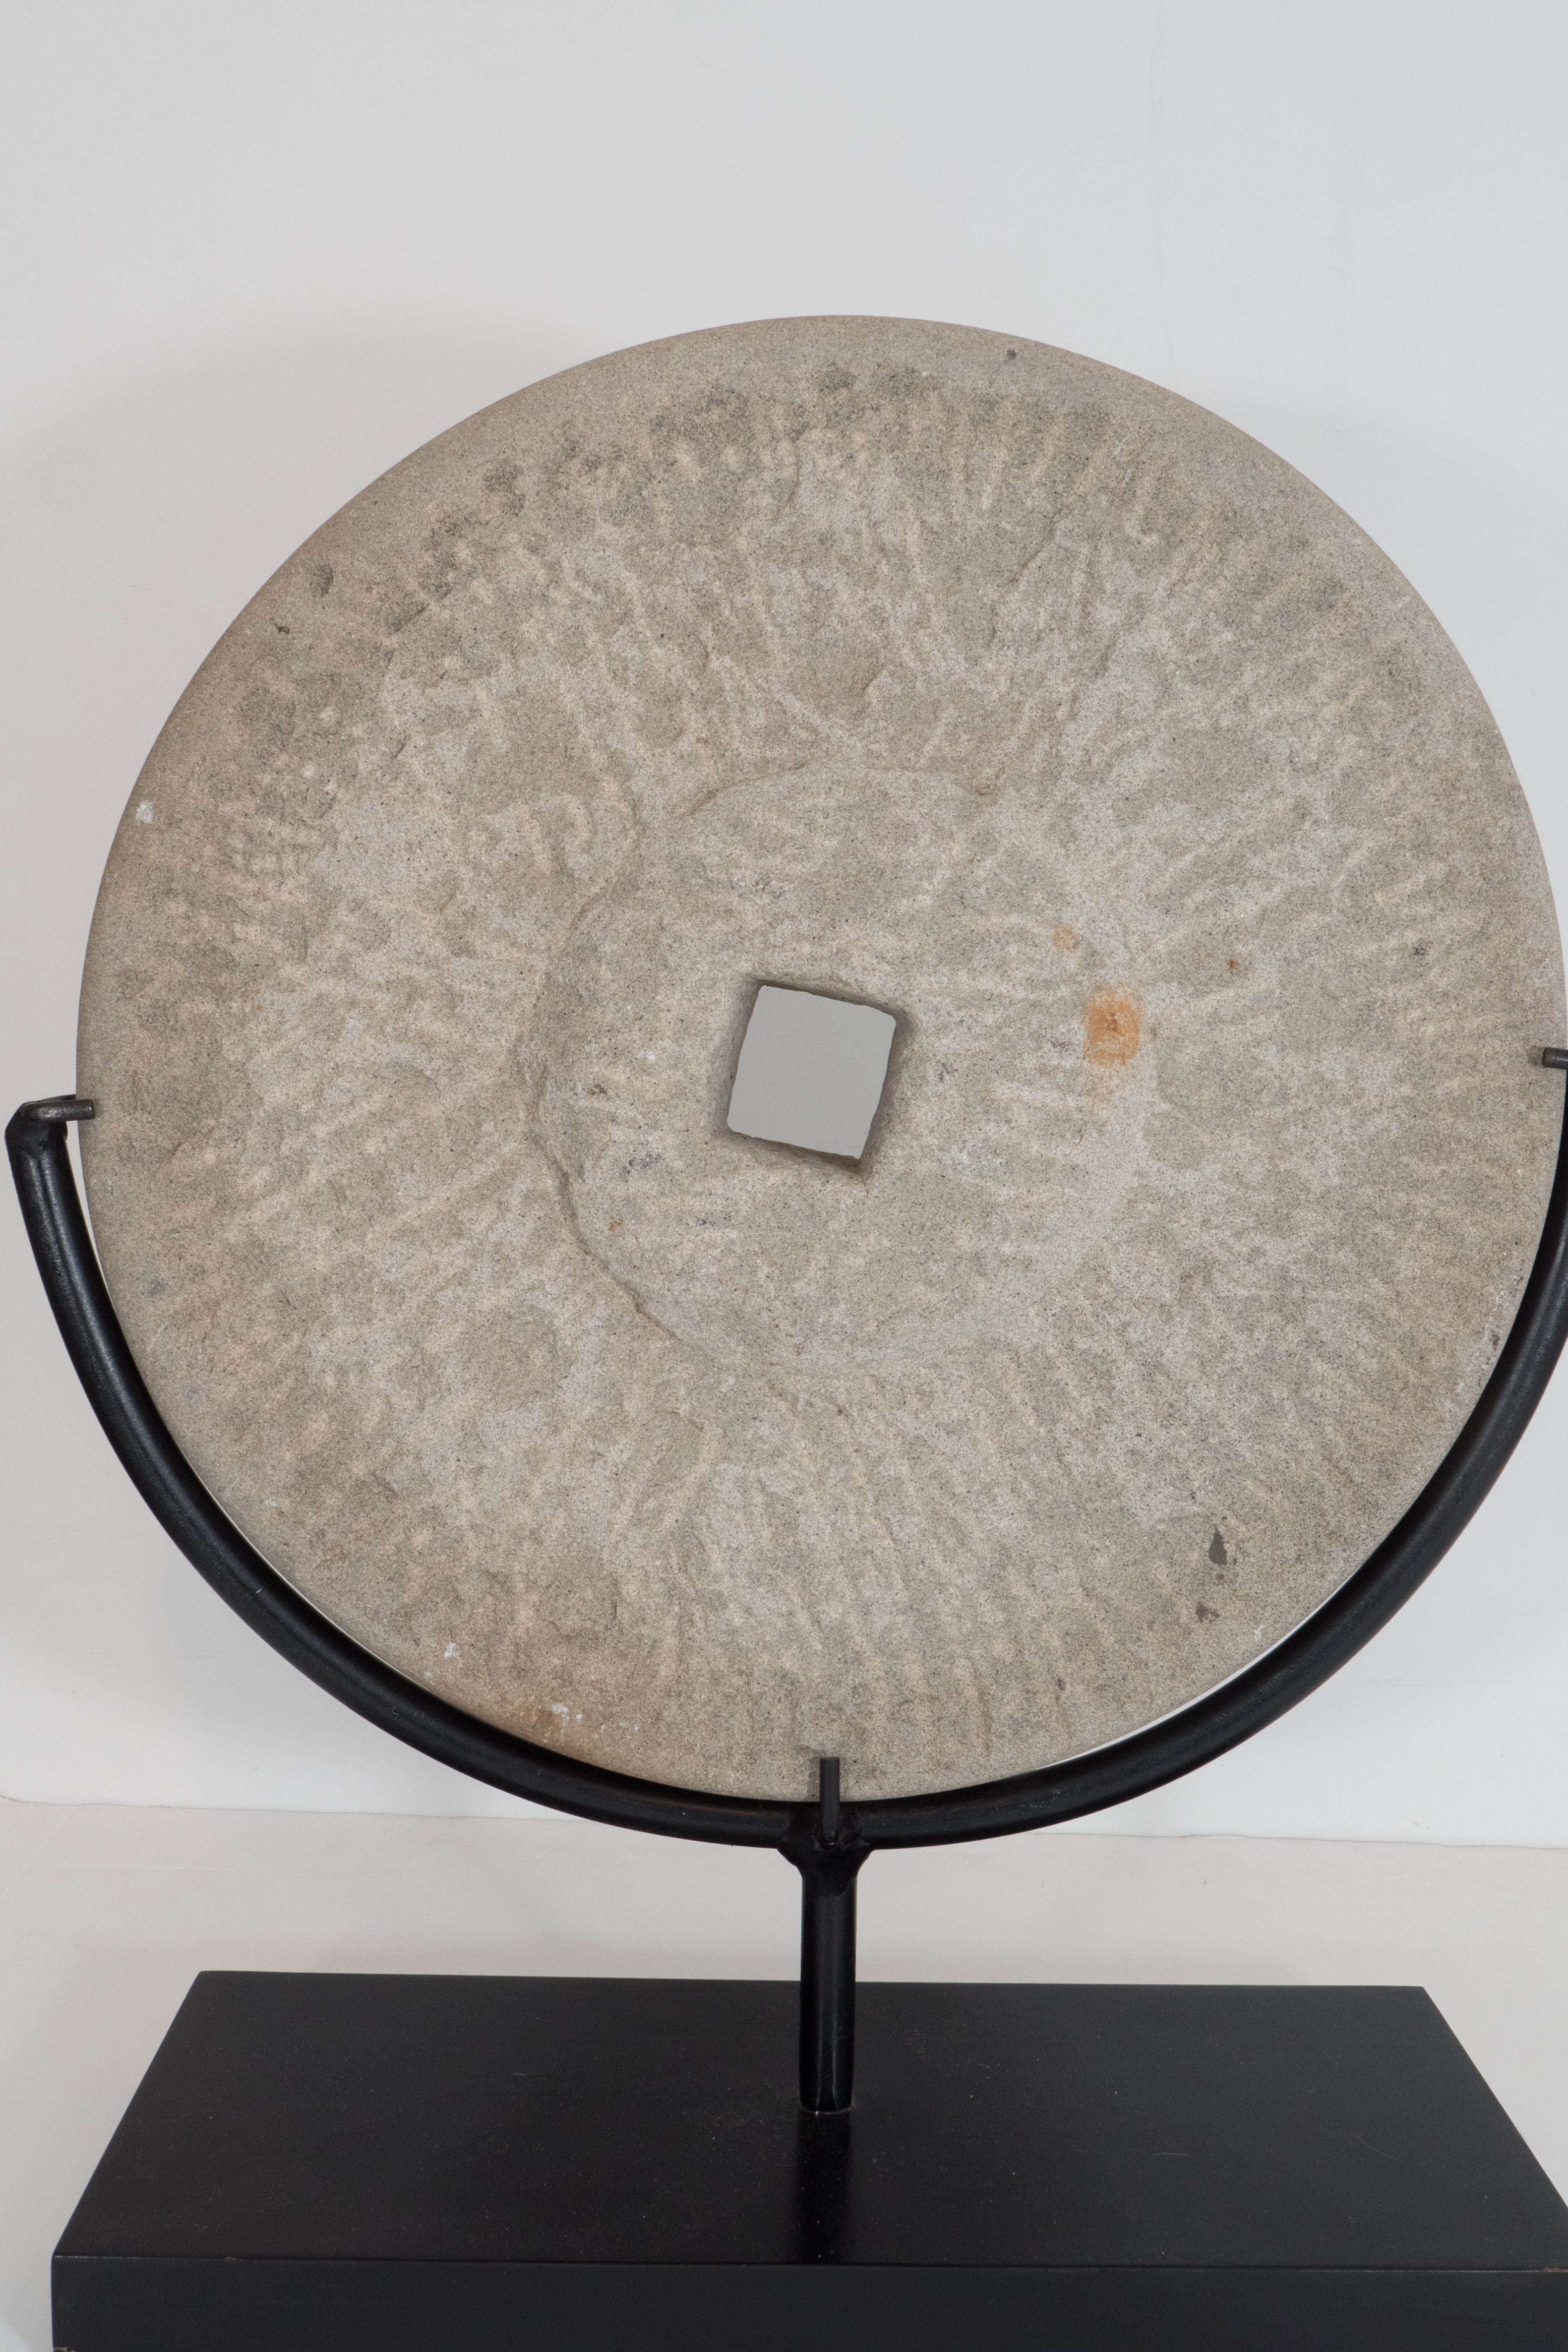 Late 19th Century Chinese Millstone on Display 1